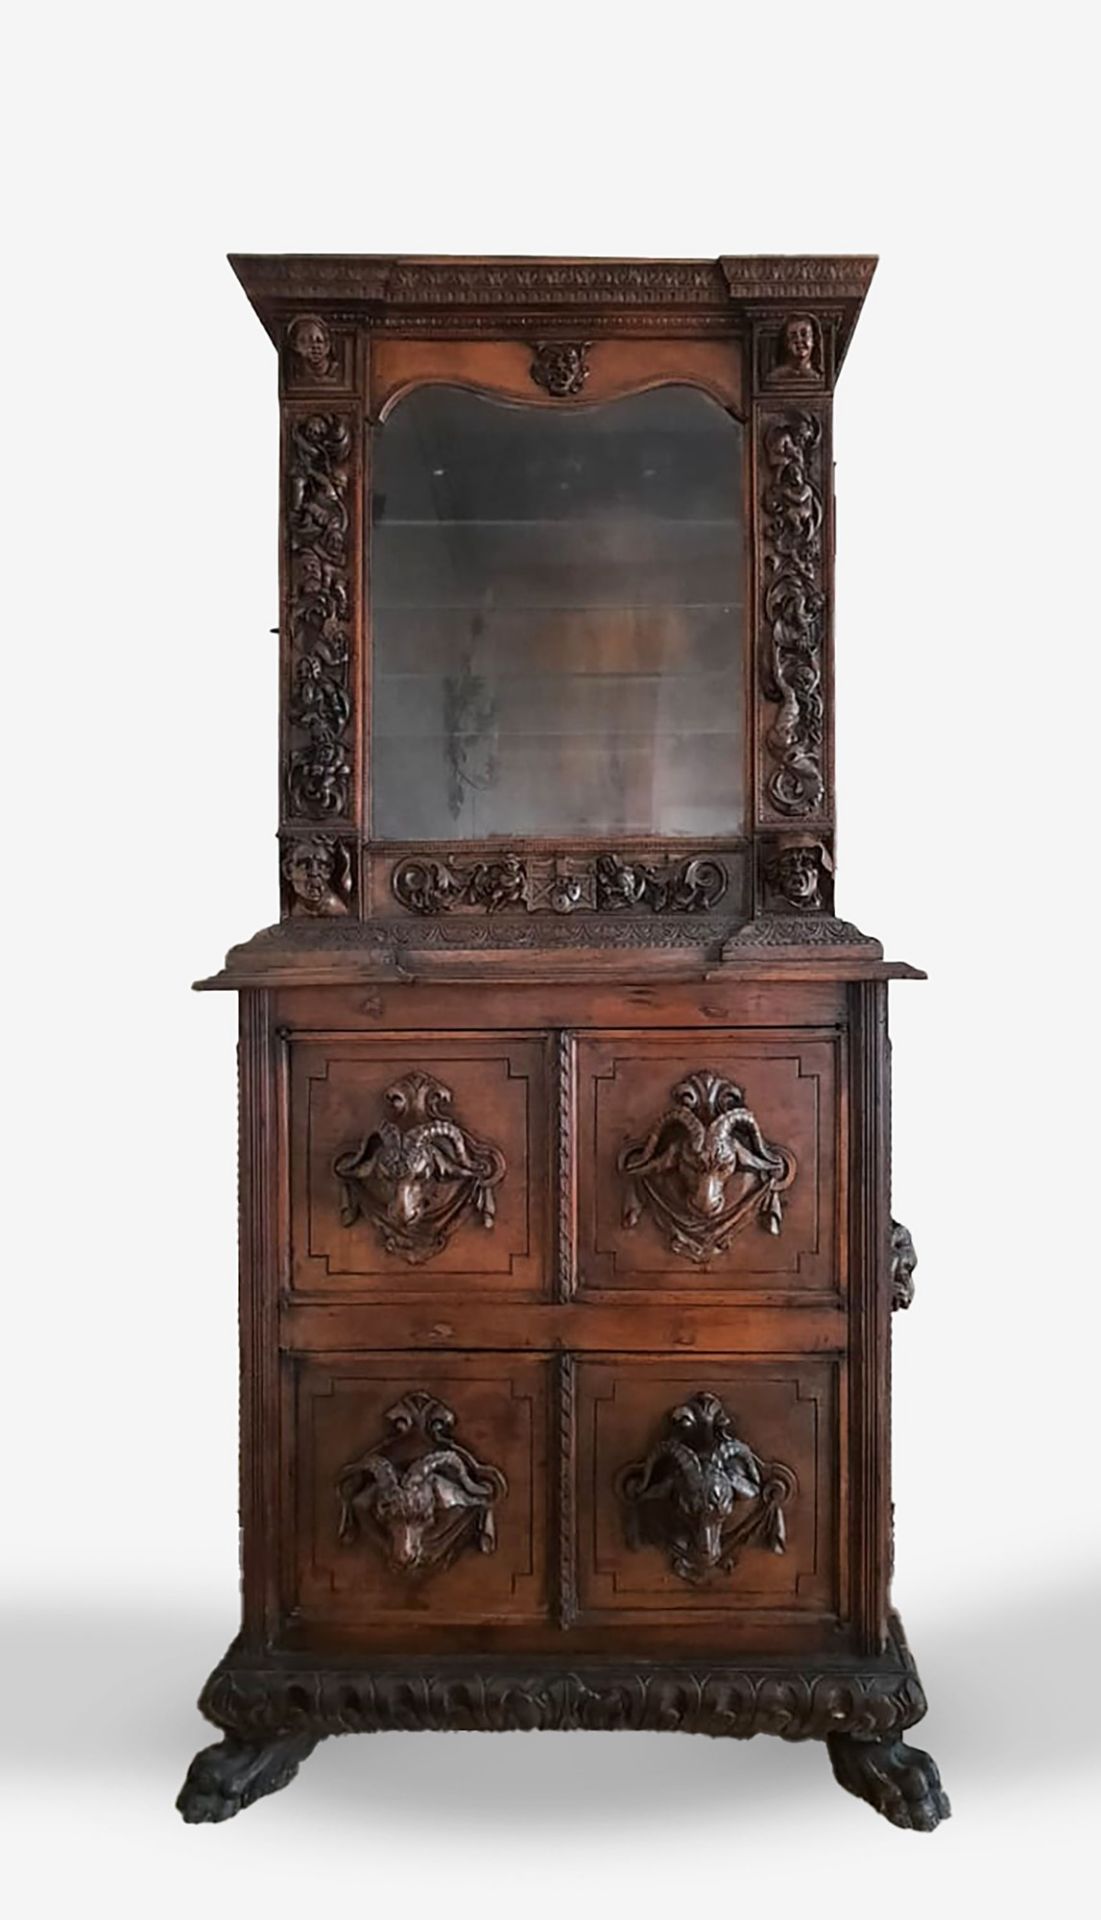 Two-parts cabinet, with Renaissance style display case, 19th century